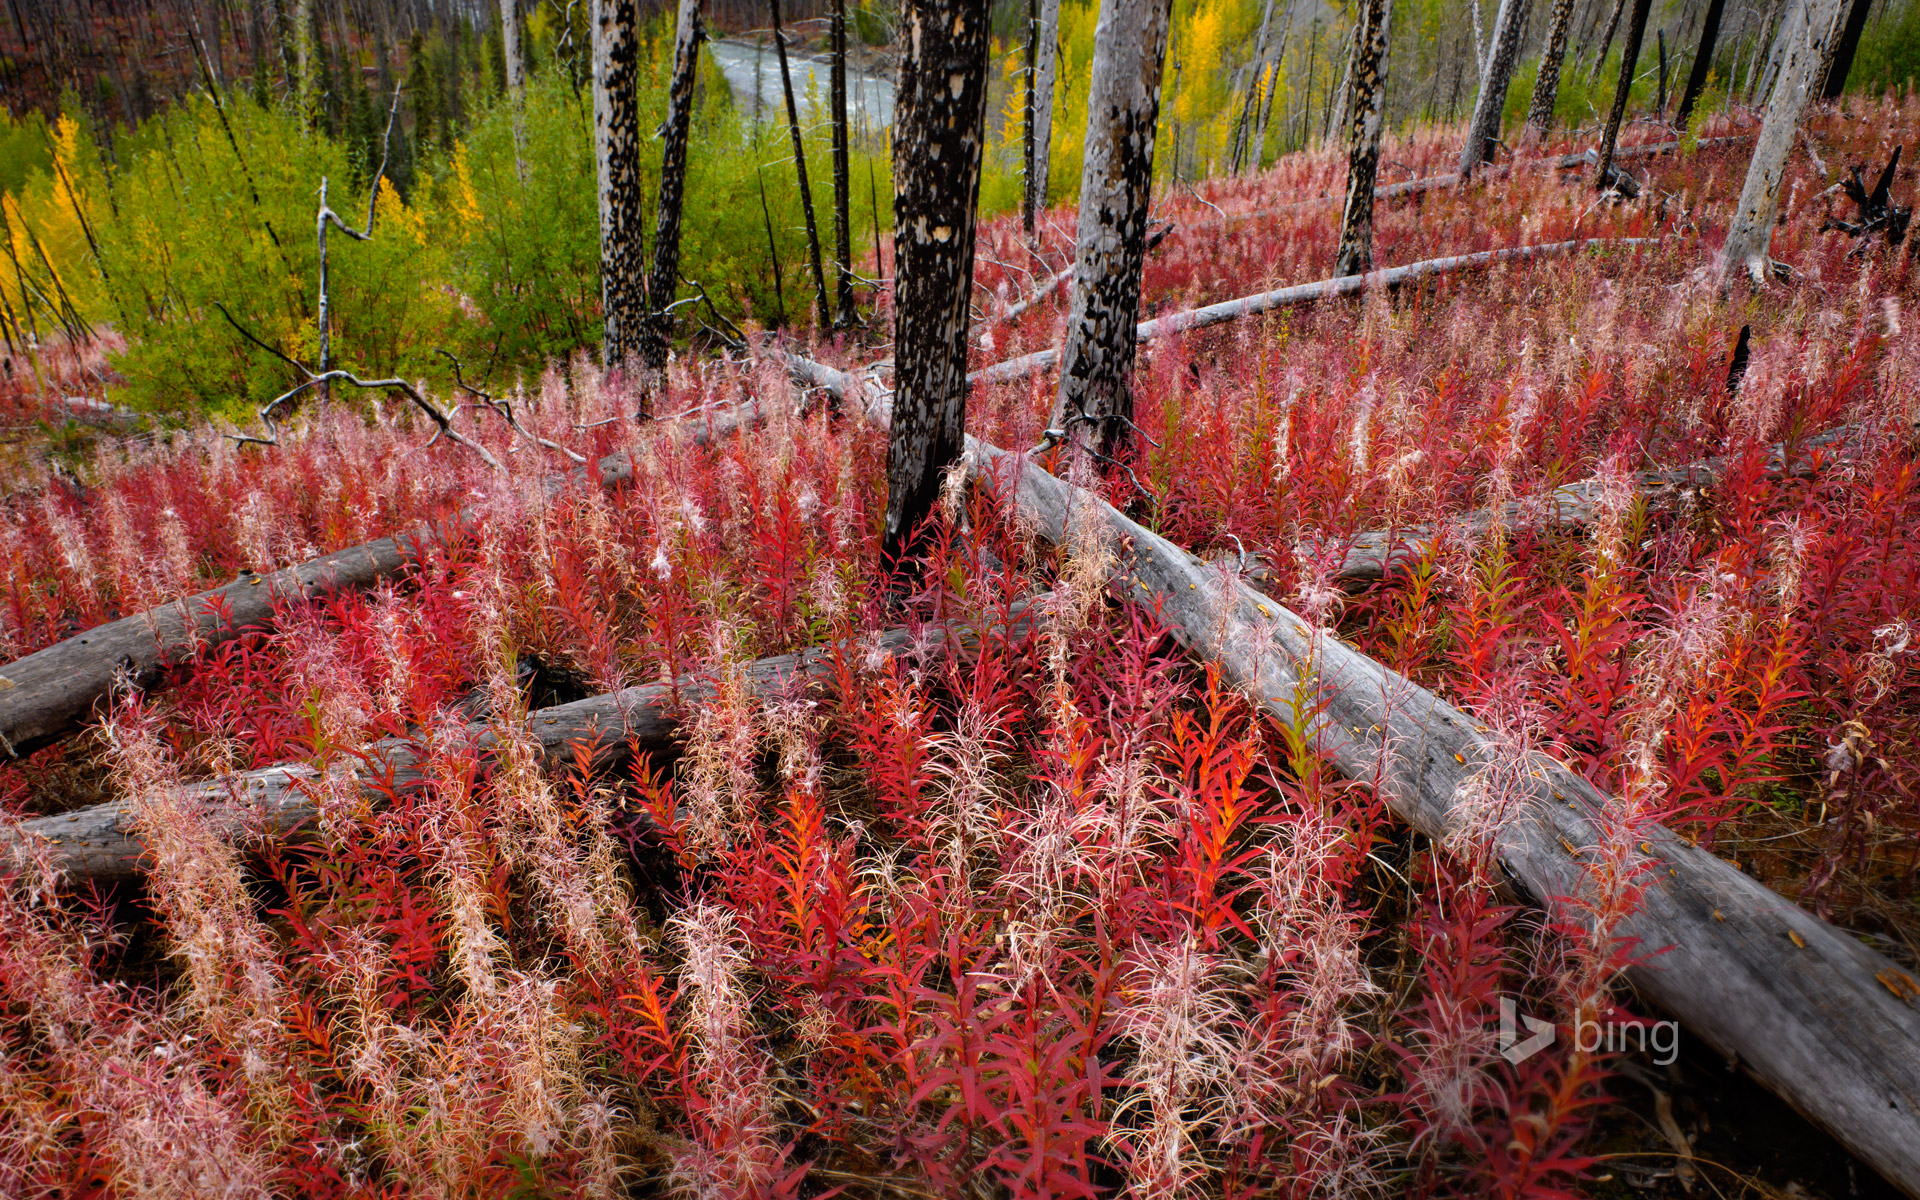 Fireweed reclaiming burned land near the Little Klappan River in British Columbia, Canada